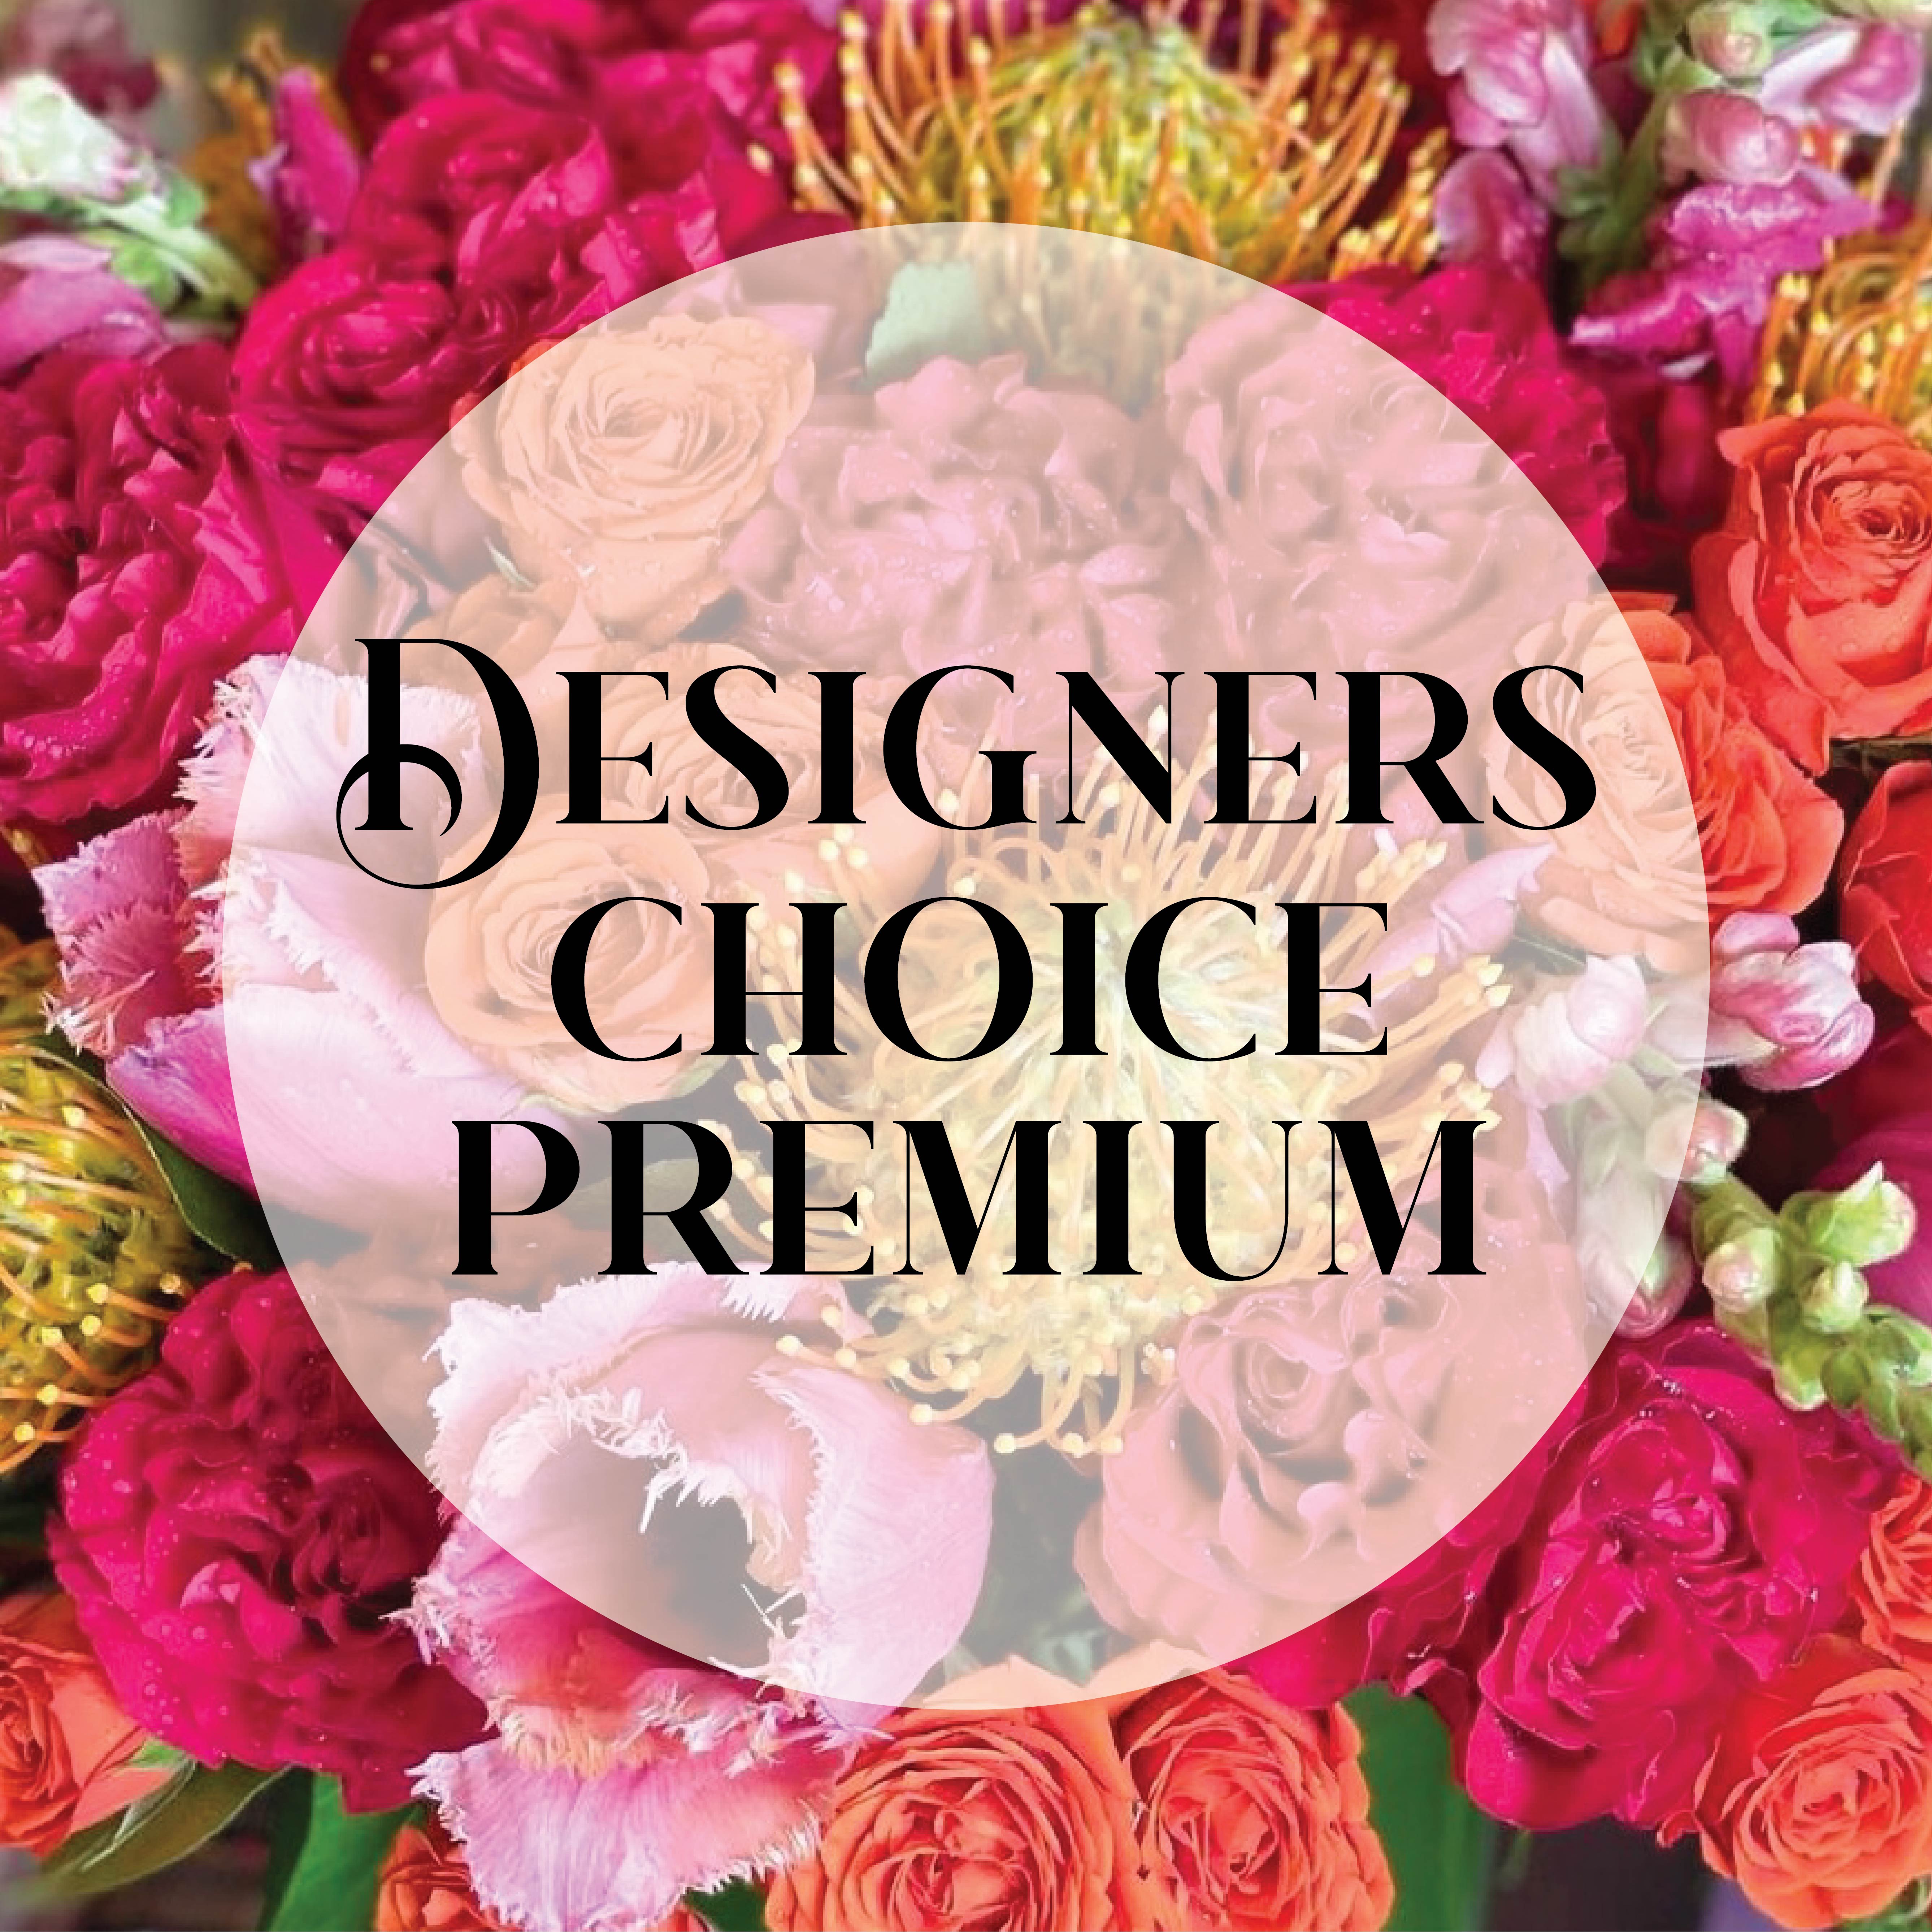  Premium Designer's Choice Arrangement - Let our professional designers choose the highest end seasonal flowers or plants for your perfect gift. *THIS INCLUDES FLORALS OR PLANTS.* (Due to high demand at this time, we cannot honor any special requests)